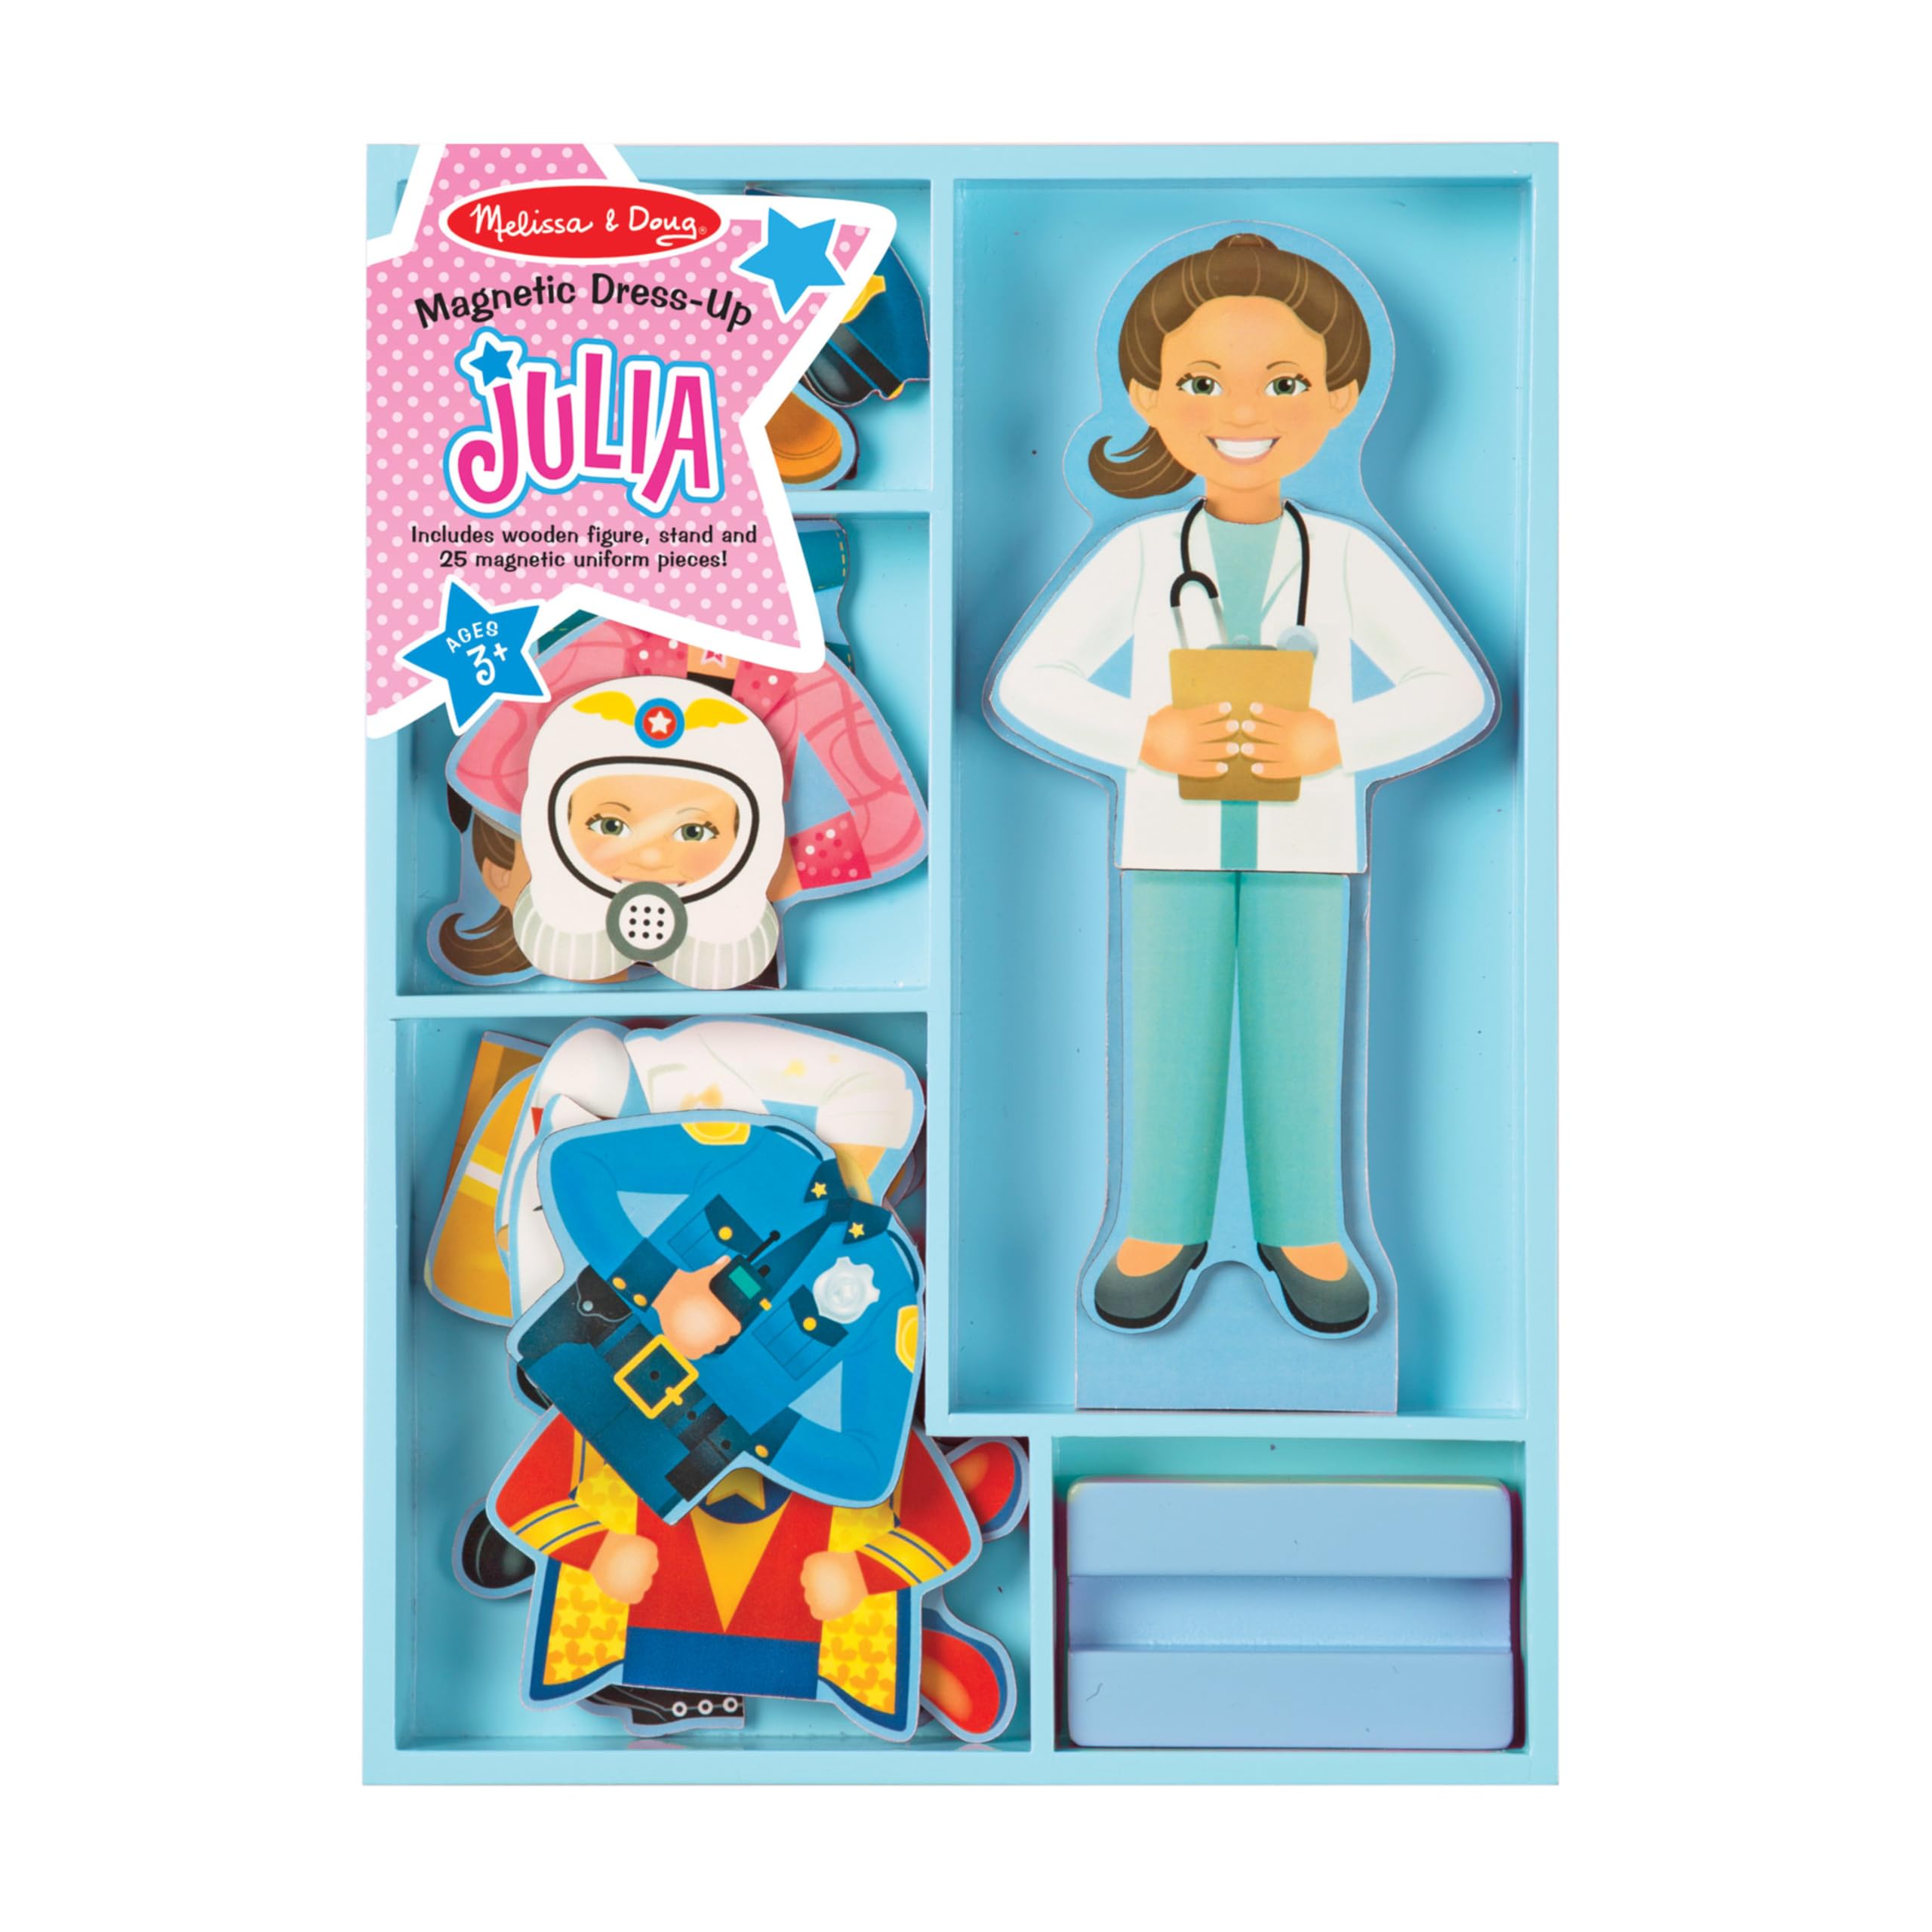 25-Piece Melissa & Doug Julia Magnetic Dress-Up Wooden Doll Pretend Play Set $5.72 + Free Shipping w/ Prime or on $35+